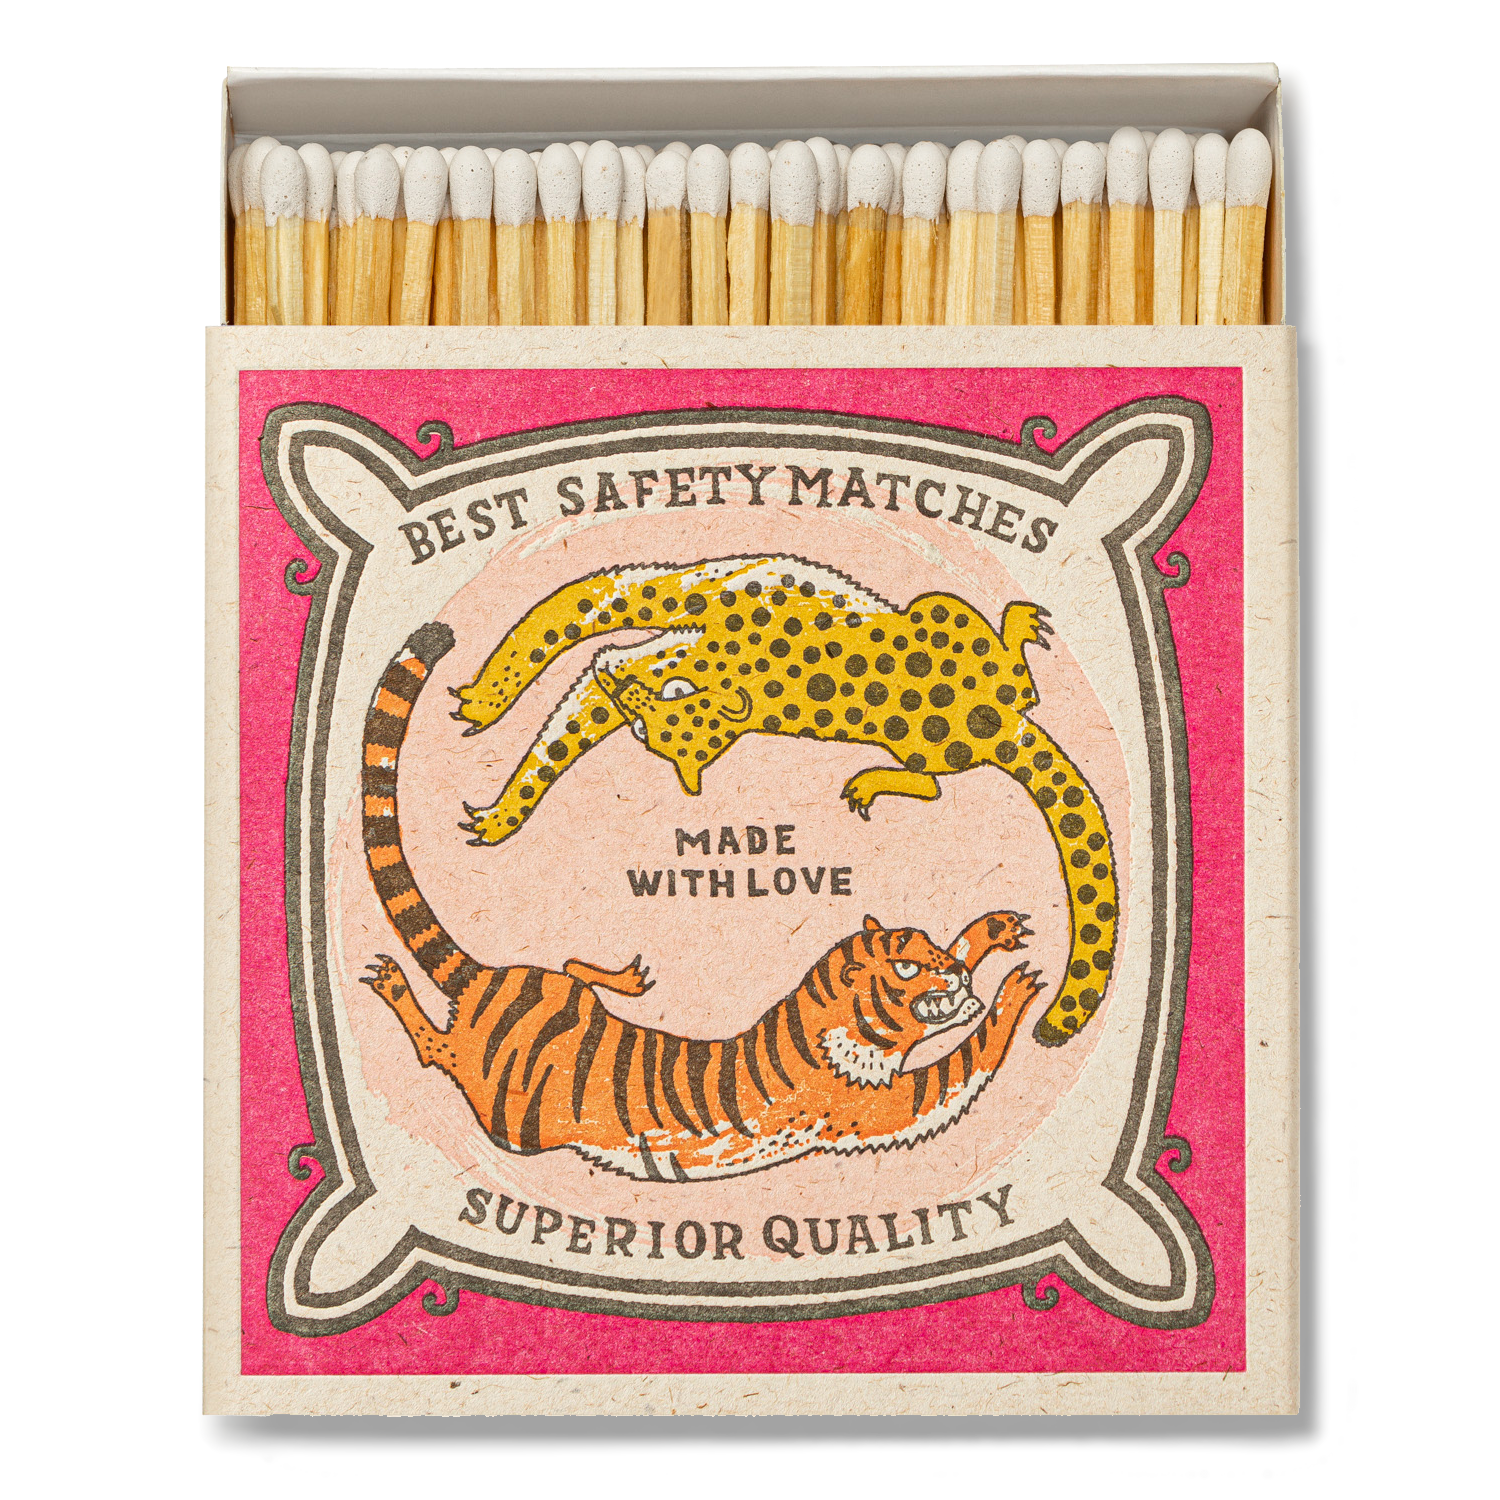 Archivist Luxury Matches - Chasing Big Cats